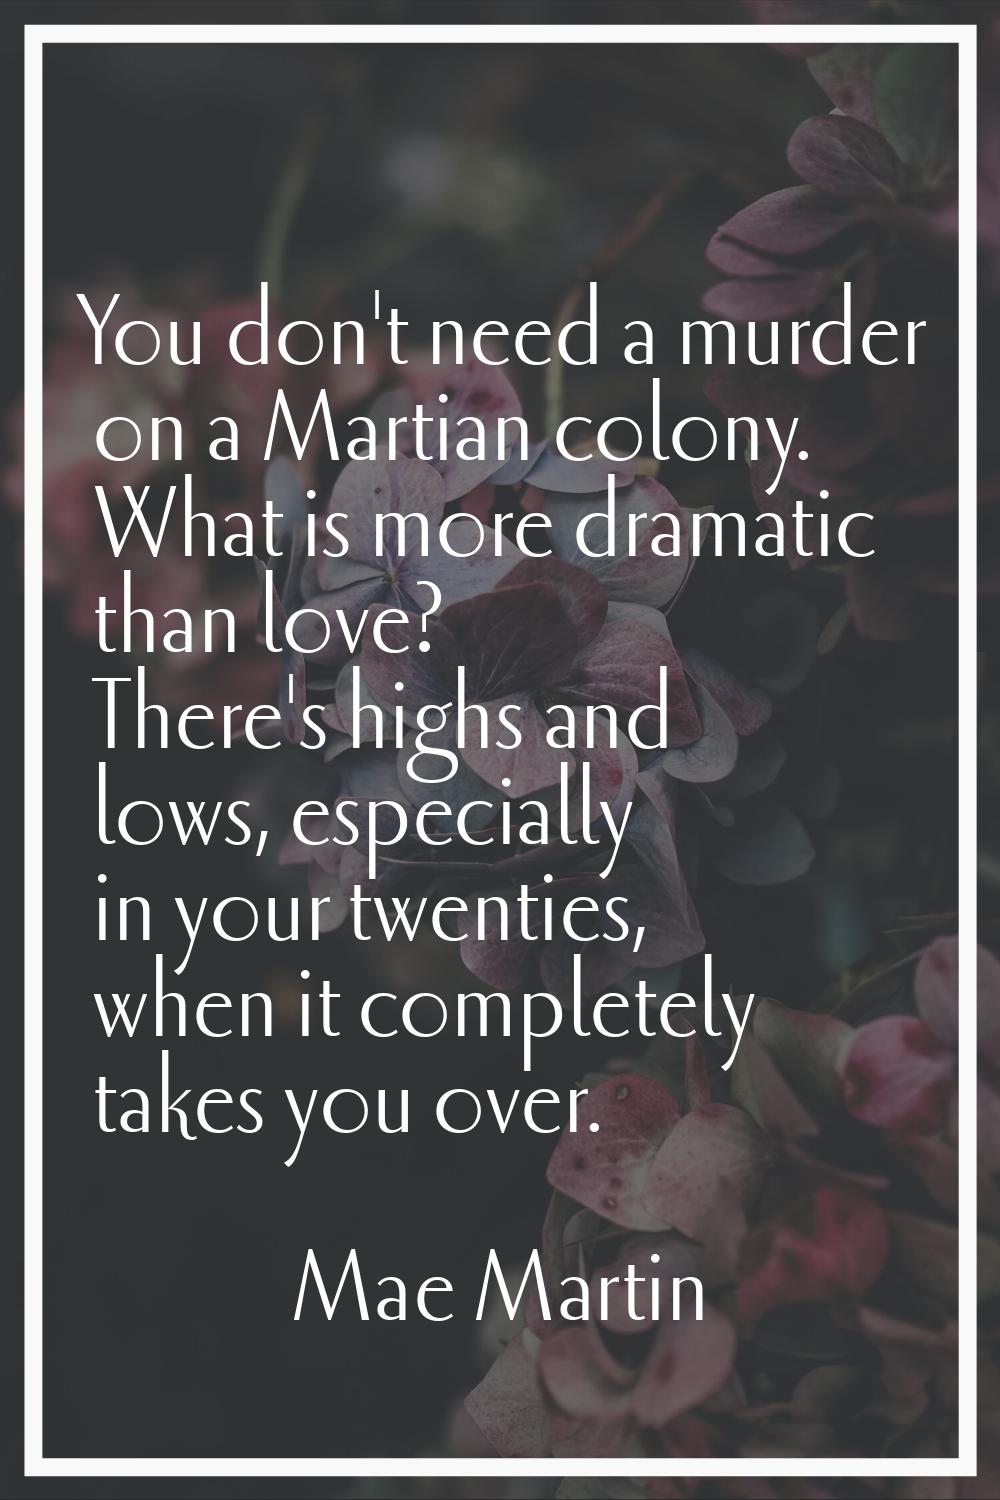 You don't need a murder on a Martian colony. What is more dramatic than love? There's highs and low